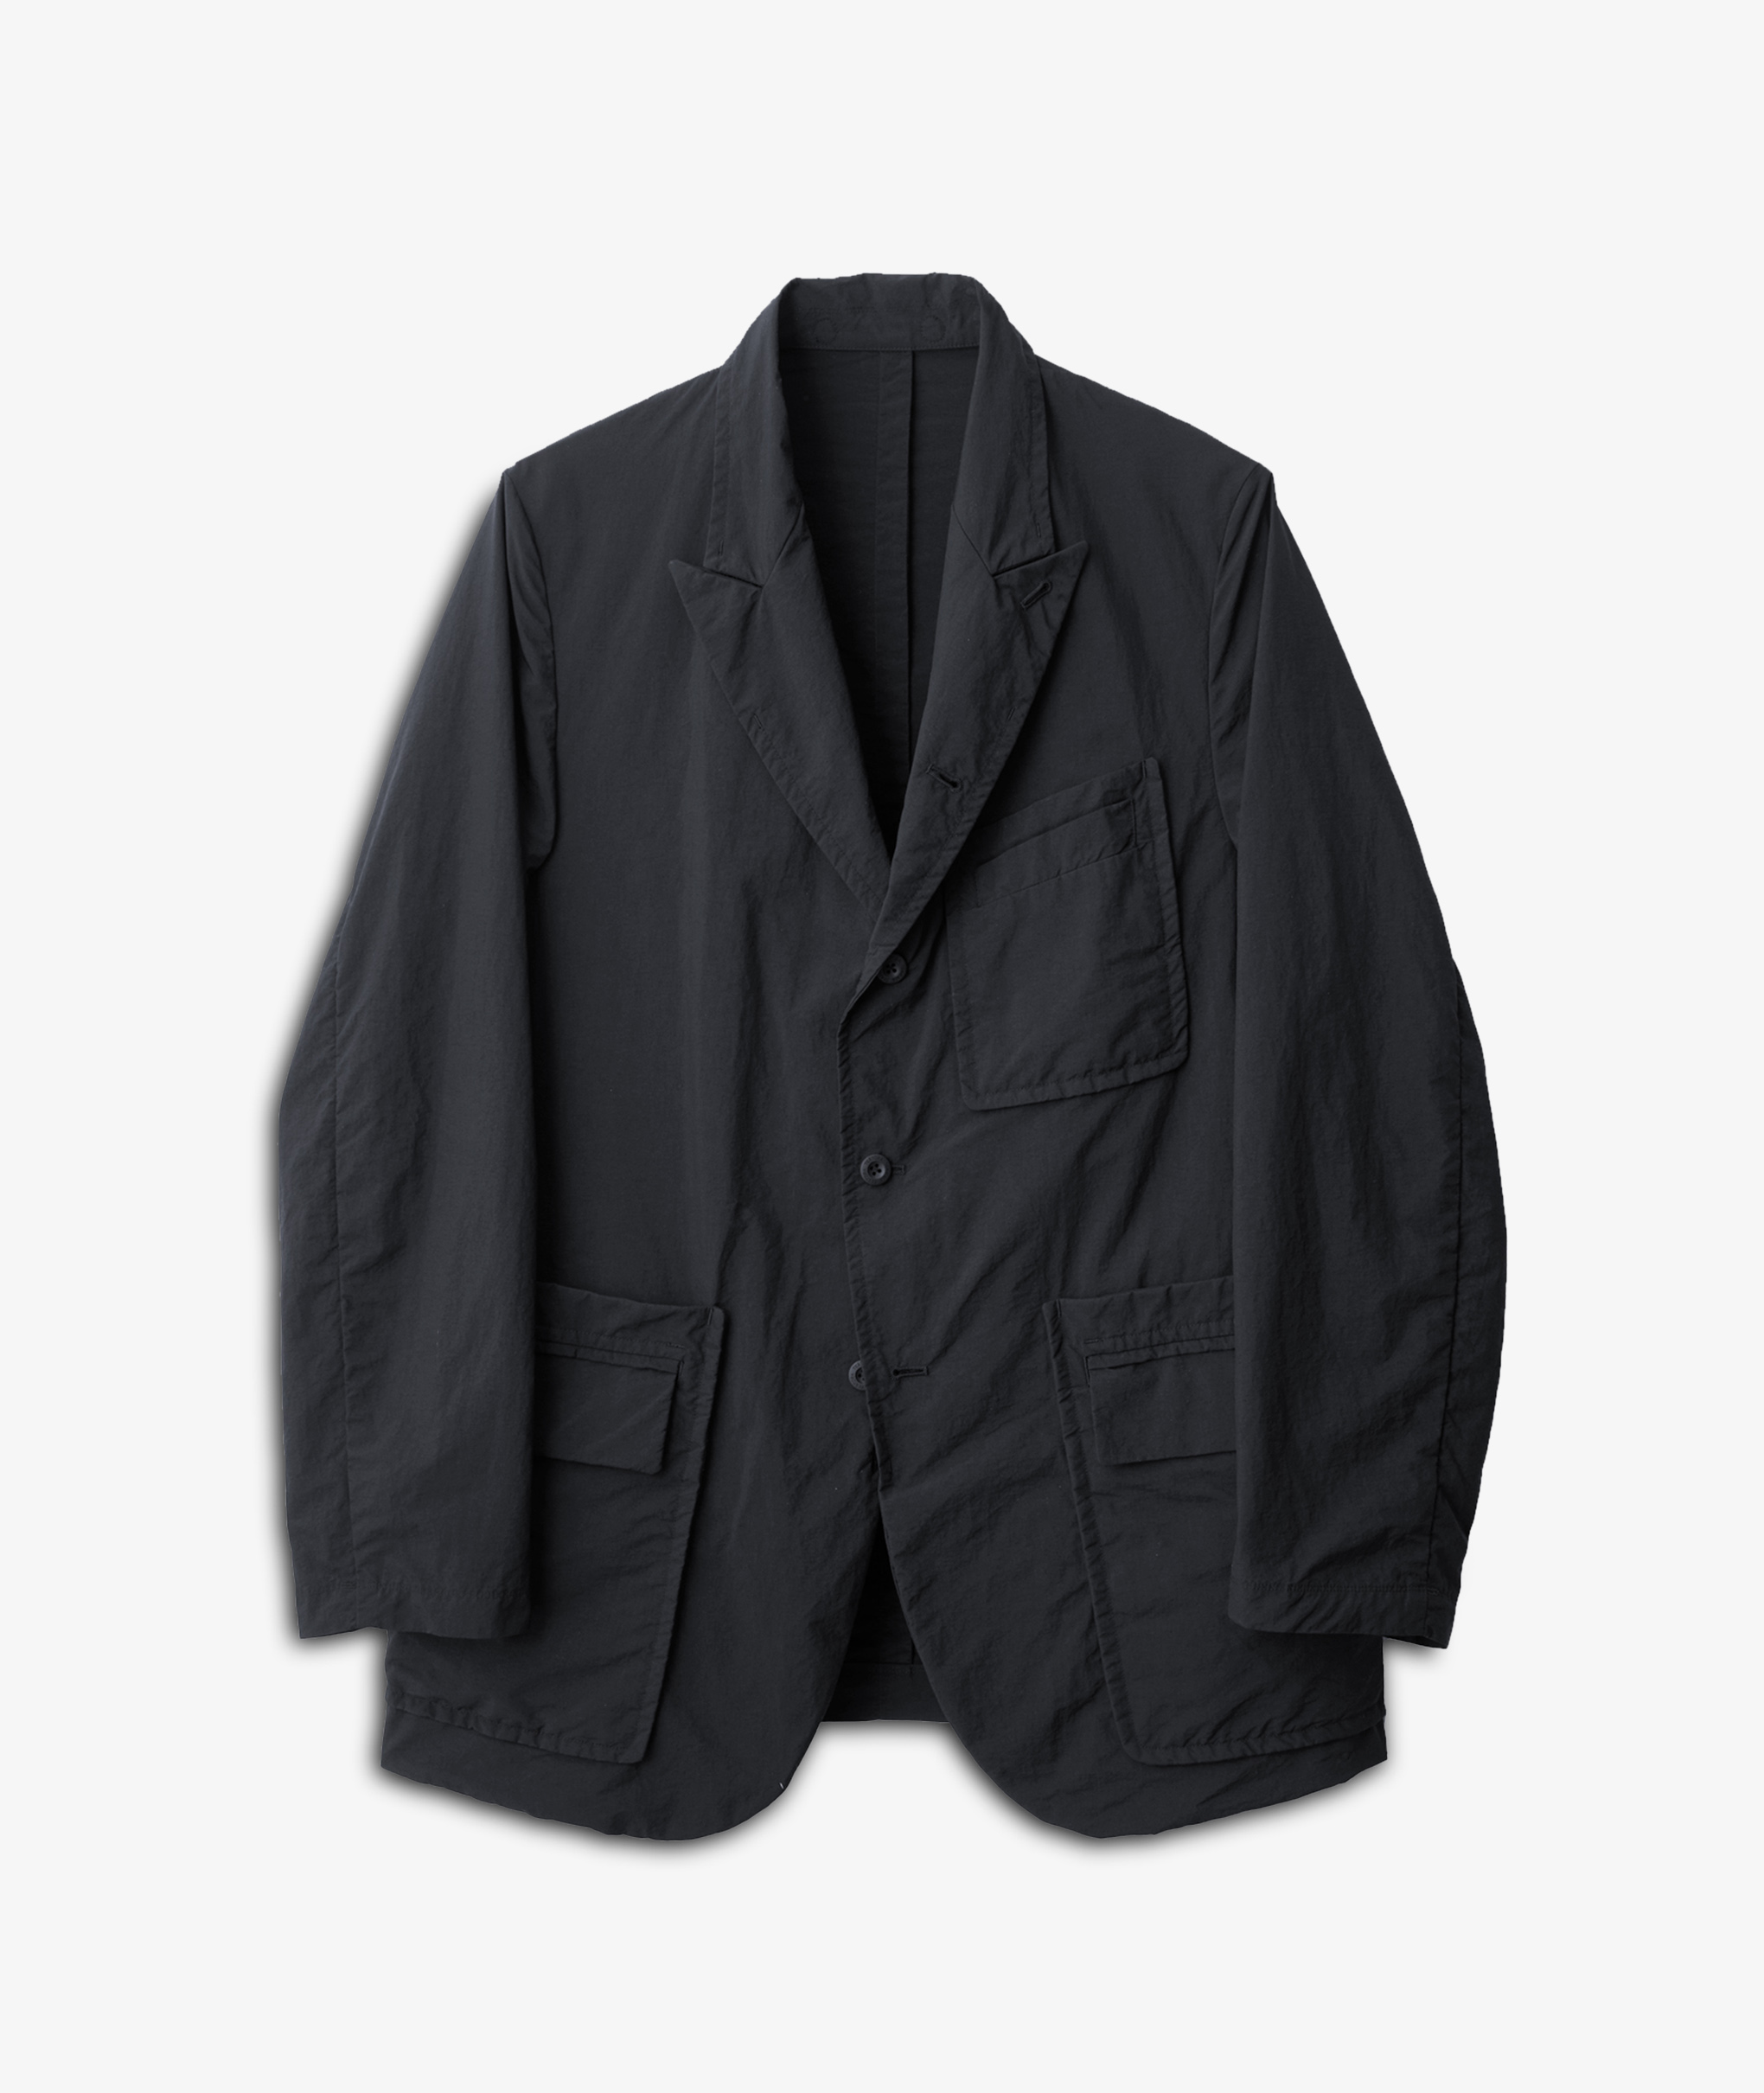 Norse Store | Shipping Worldwide - TEÄTORA Packable CW Jacket